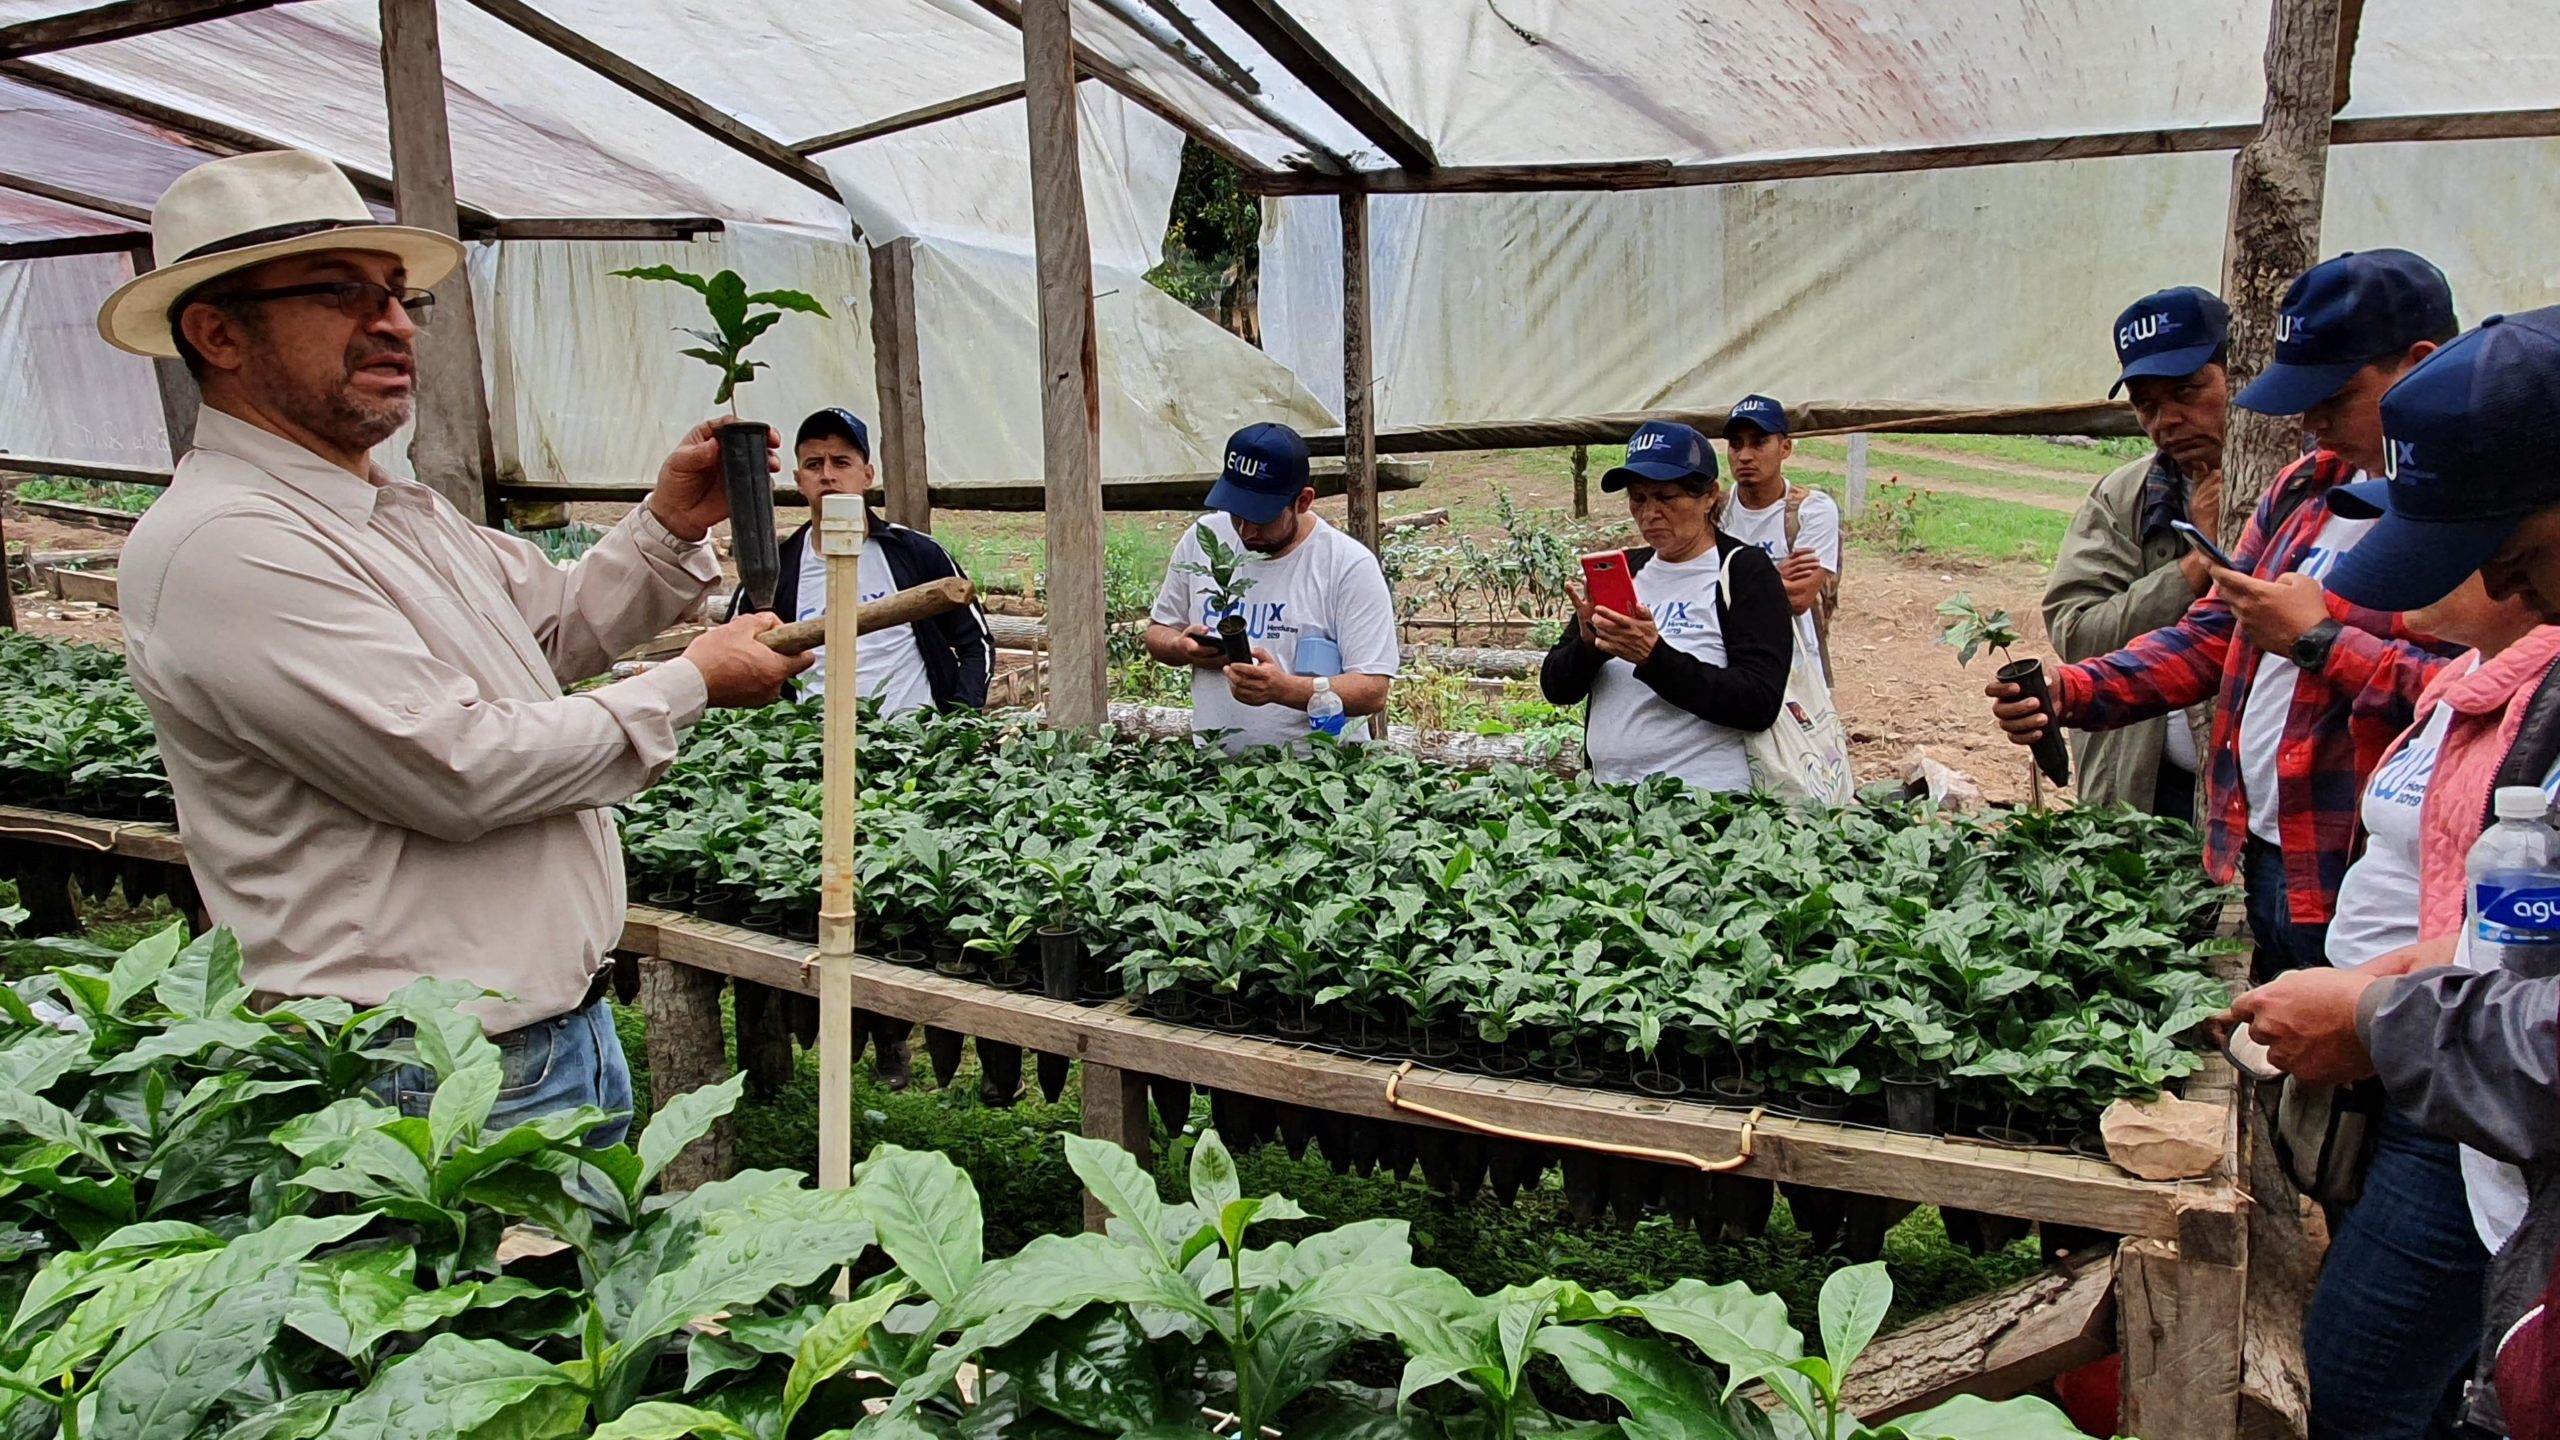 An agronomist holds up a coffee plant in a nursery while workshop participants take notes on their phones.